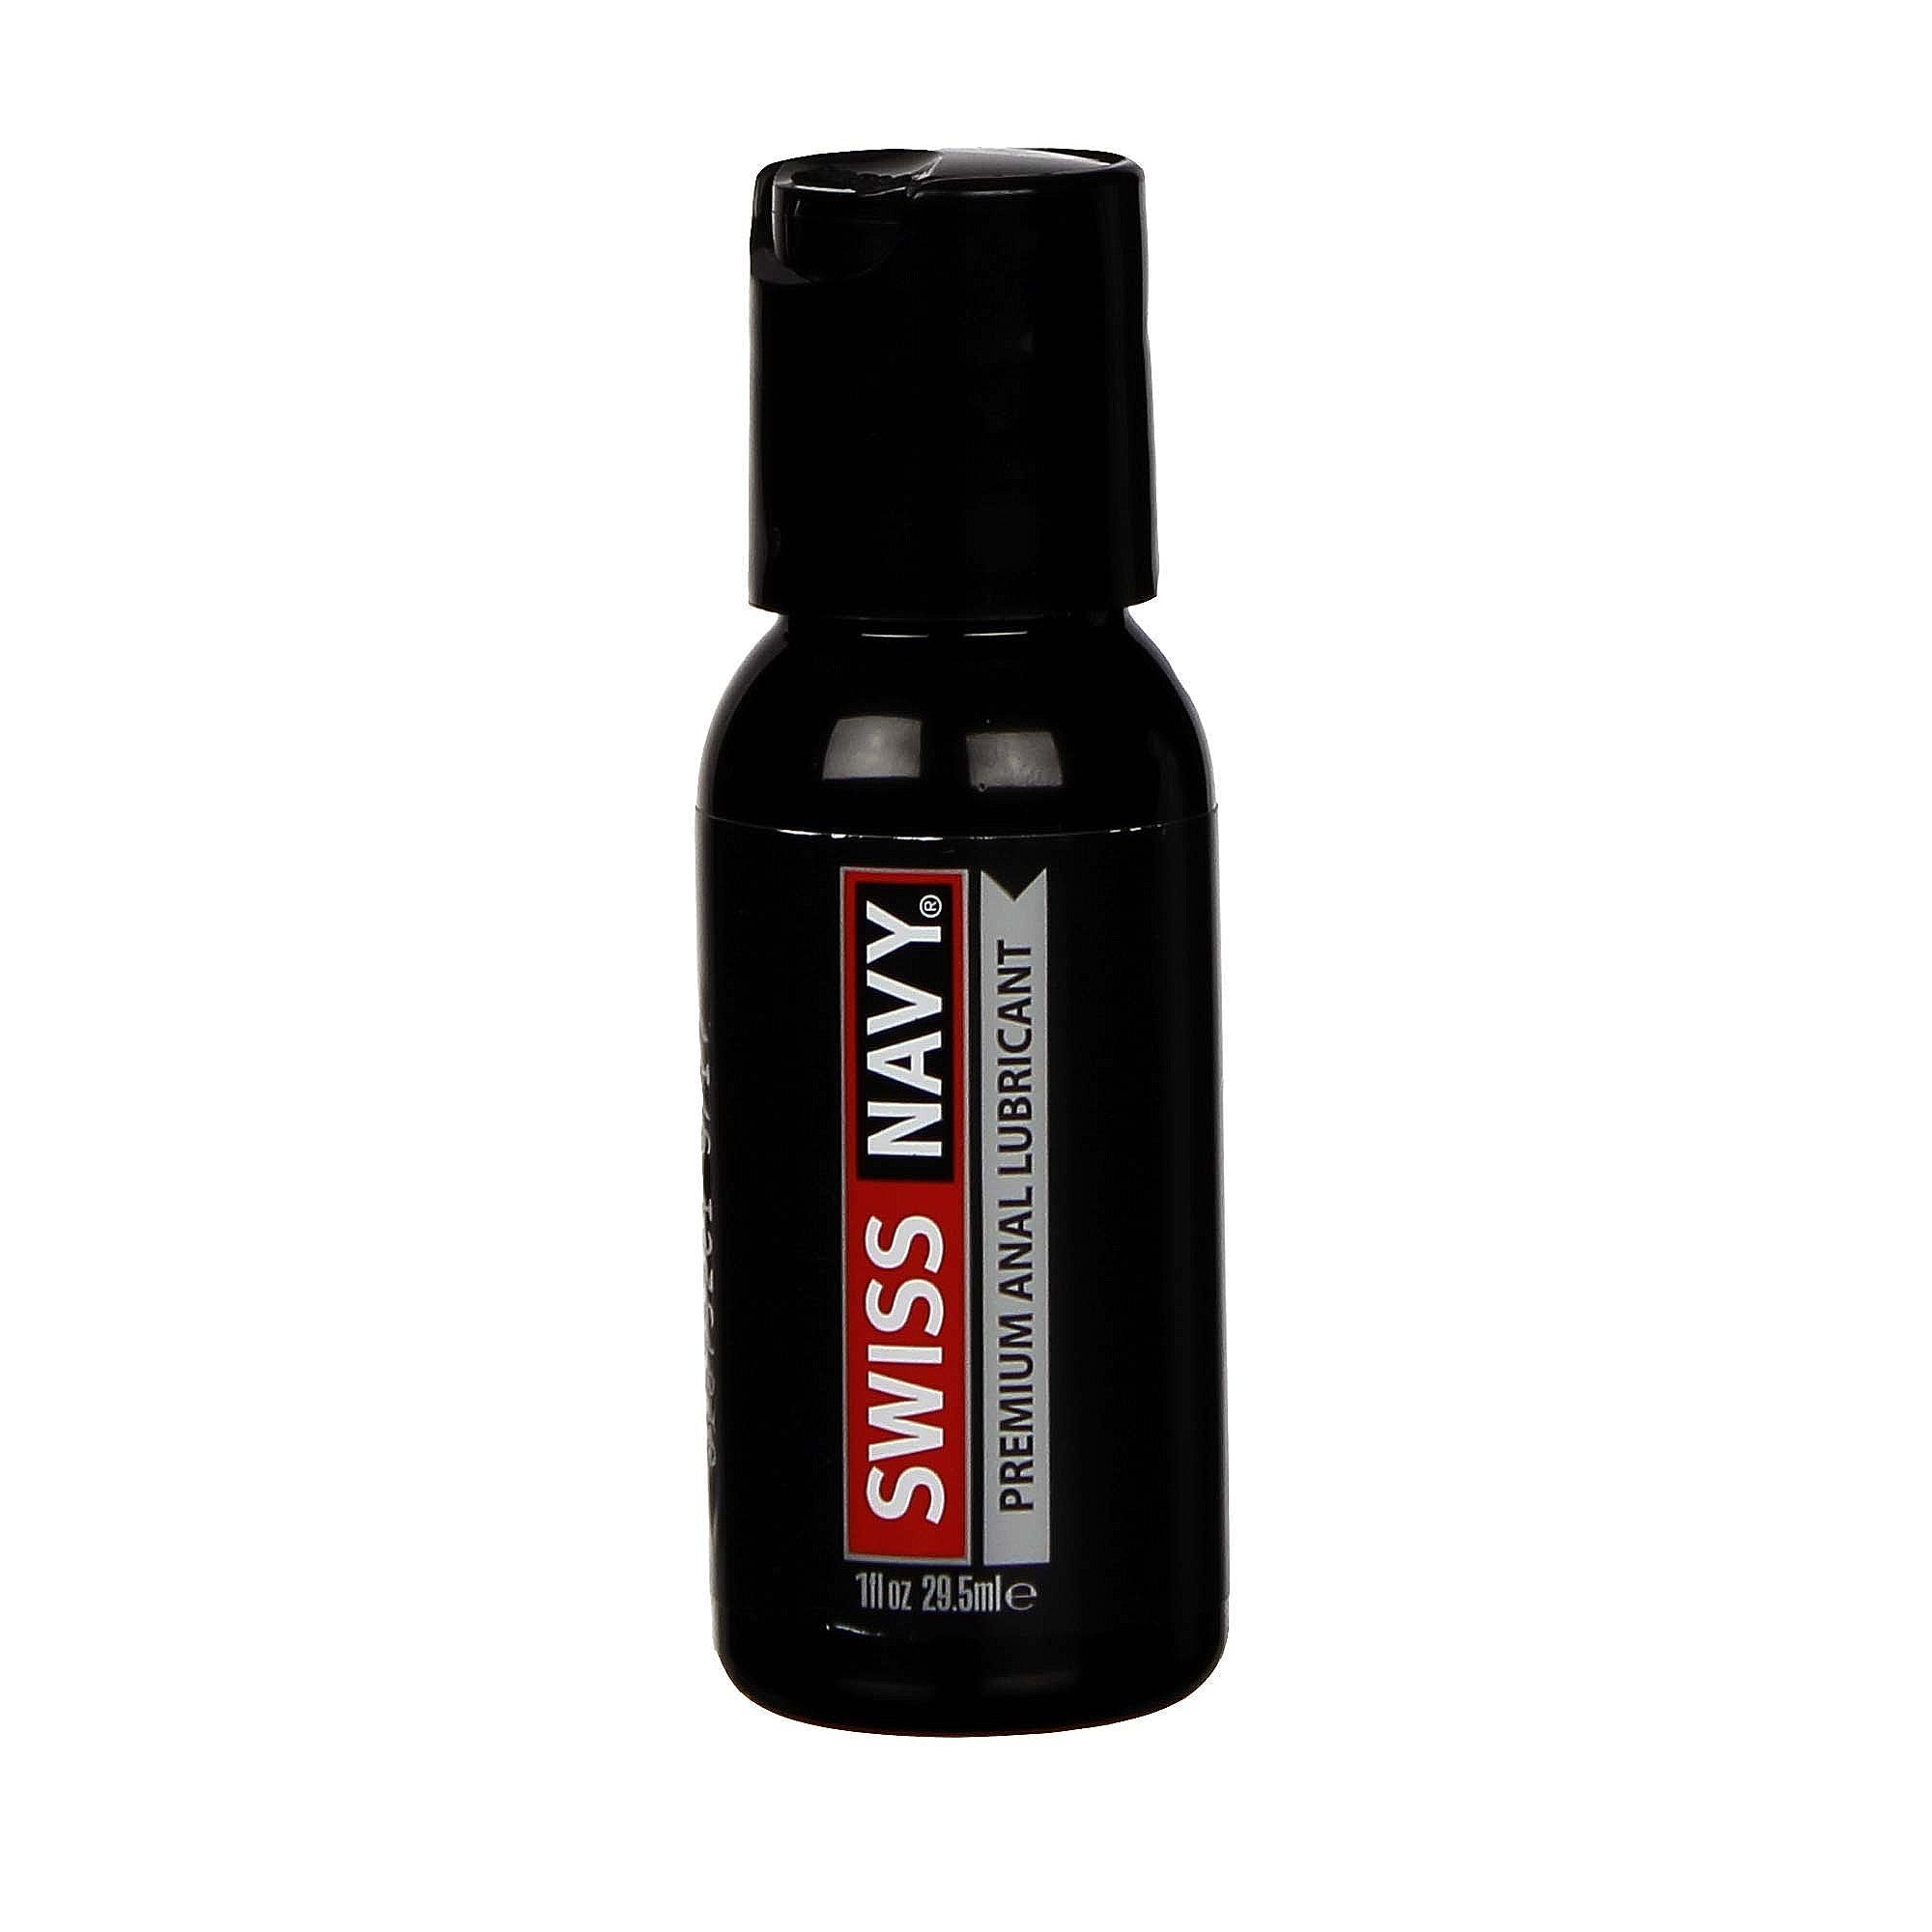 Swiss Navy - Premium Anal Silicone Based Lubricant 1oz -  Lube (Silicone Based)  Durio.sg